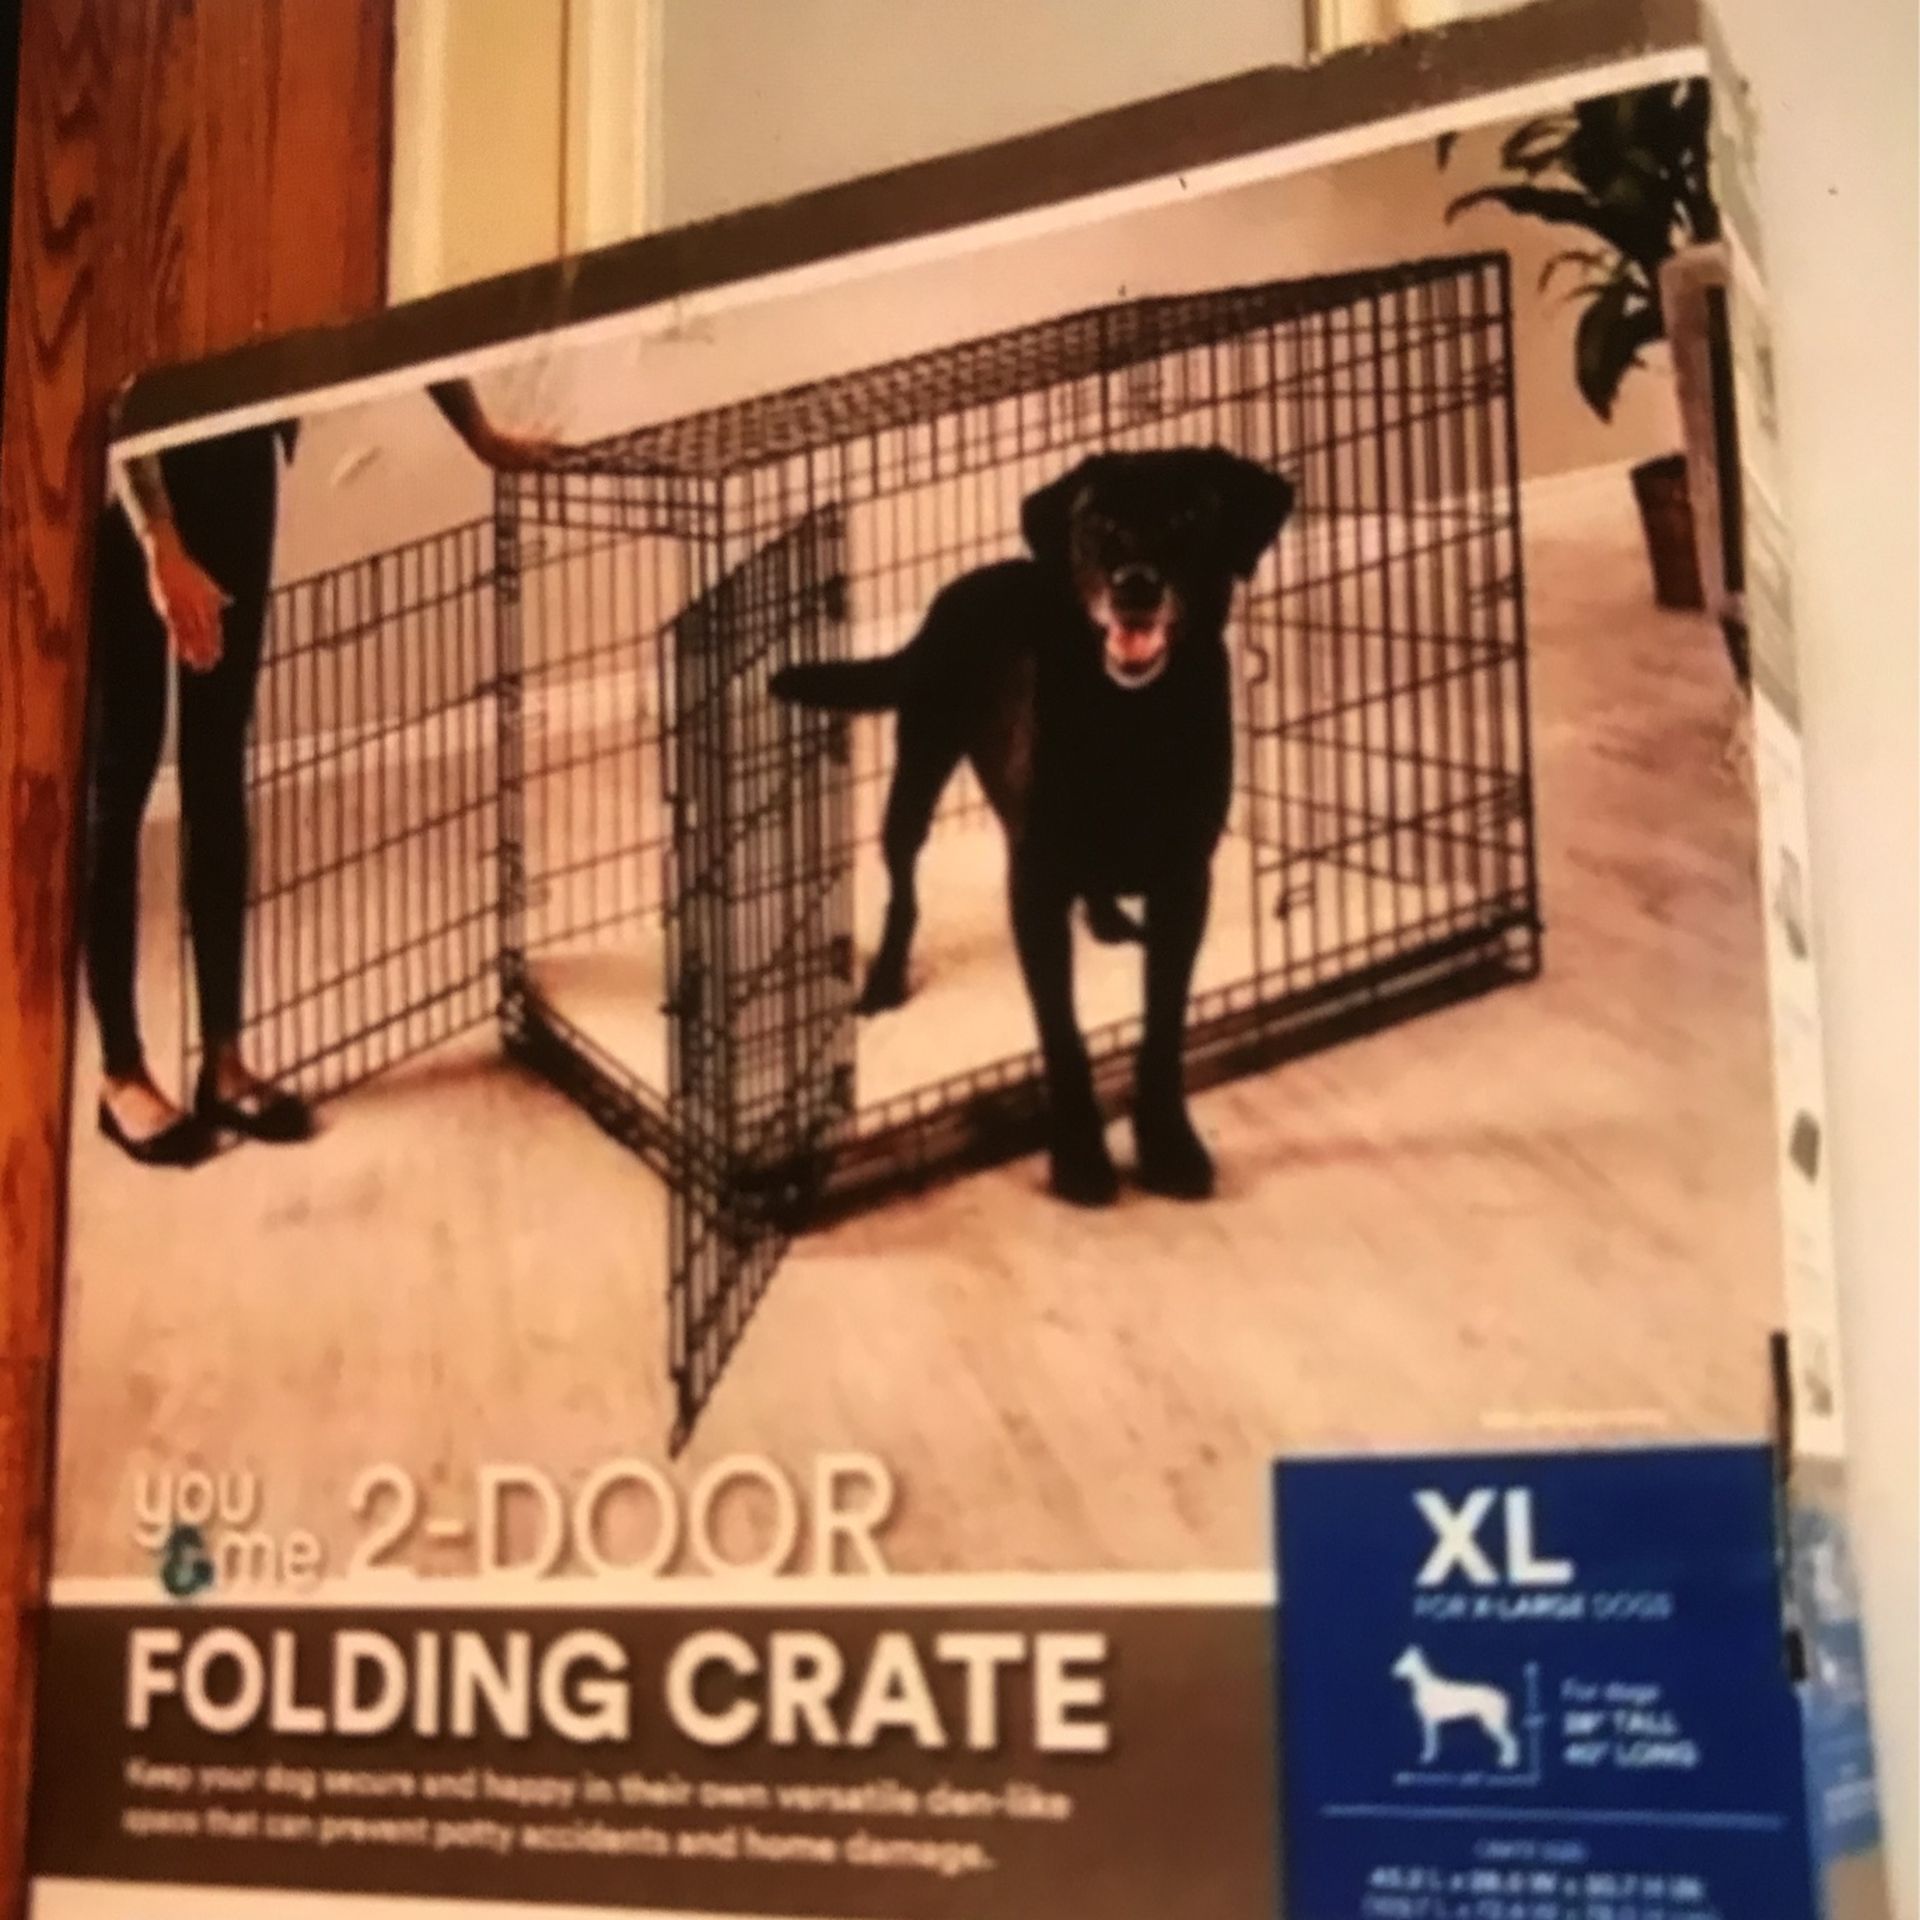 XL DOG CAGE from me & you